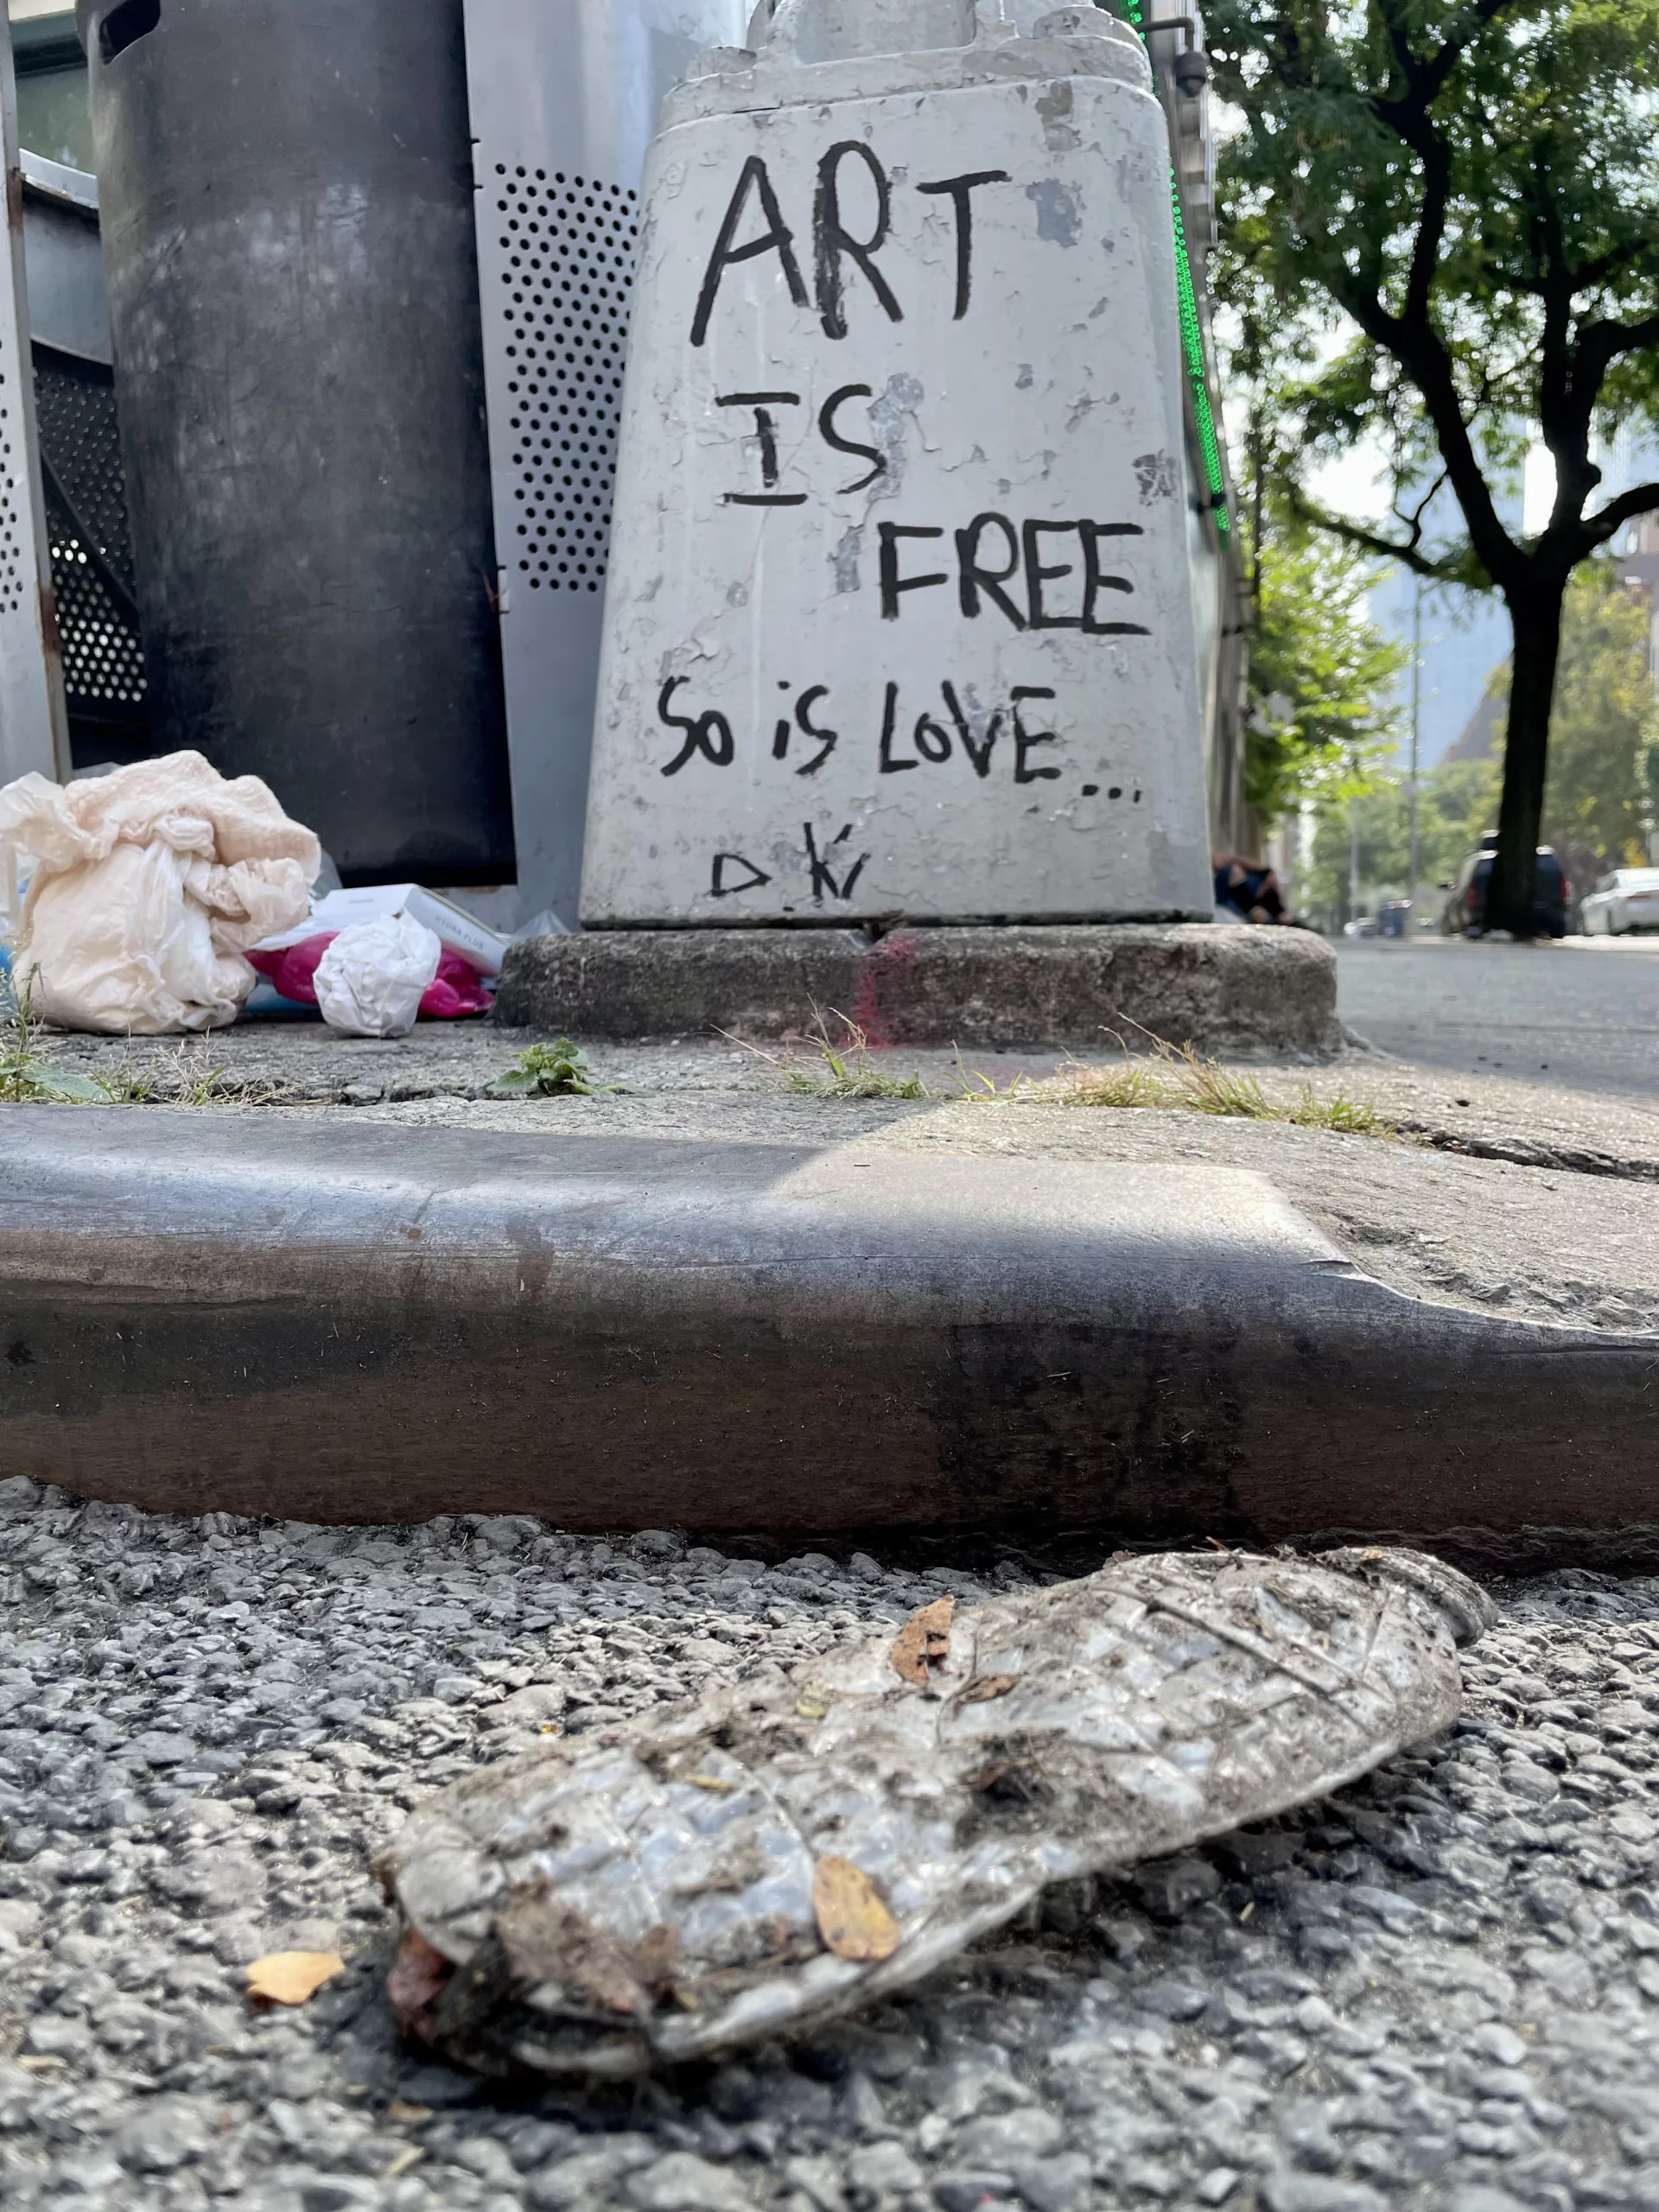 Graffiti on a New York City lamppost declaring "Art is free, so is love."